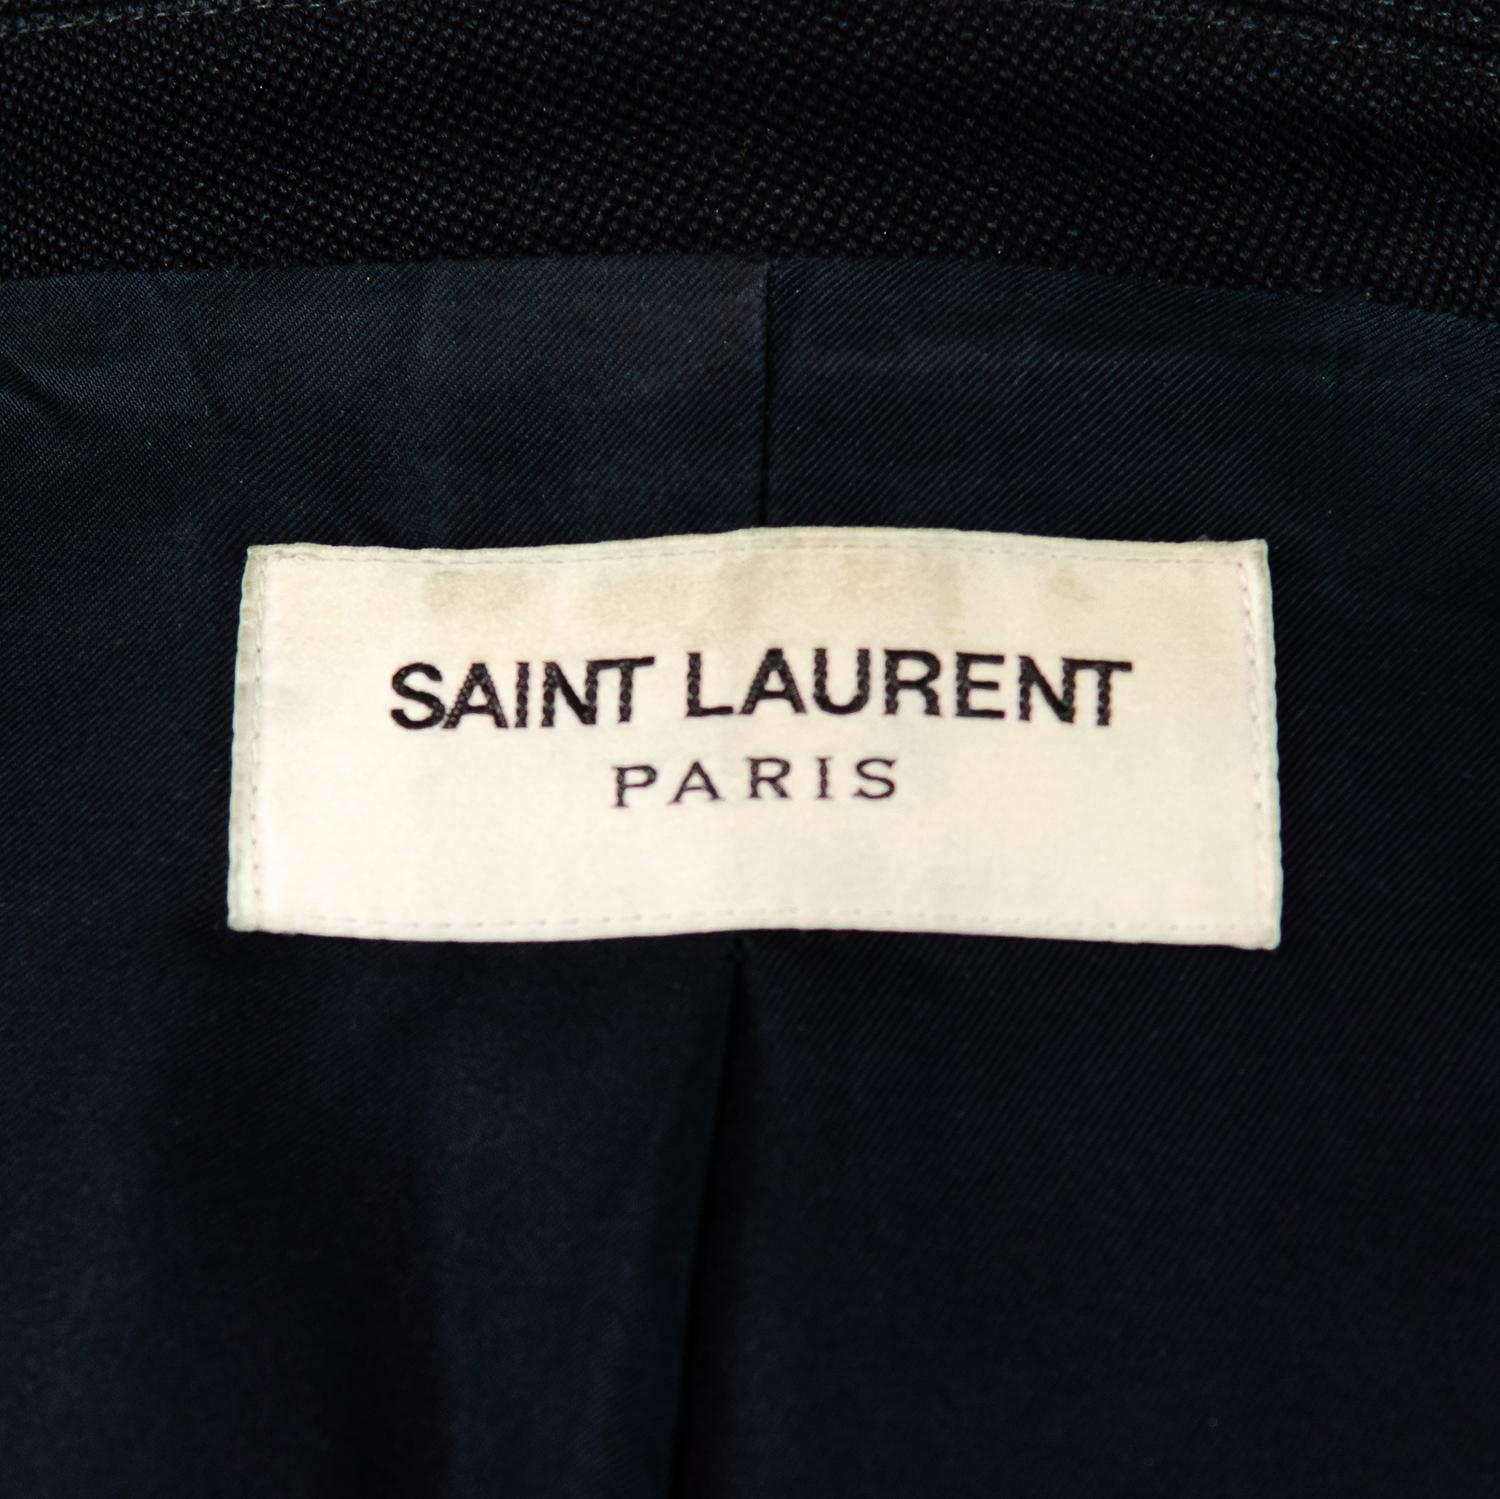 SAINT LAURENT By HEDI SLIMANE F/W 2013 Military Style Jacket  For Sale 5